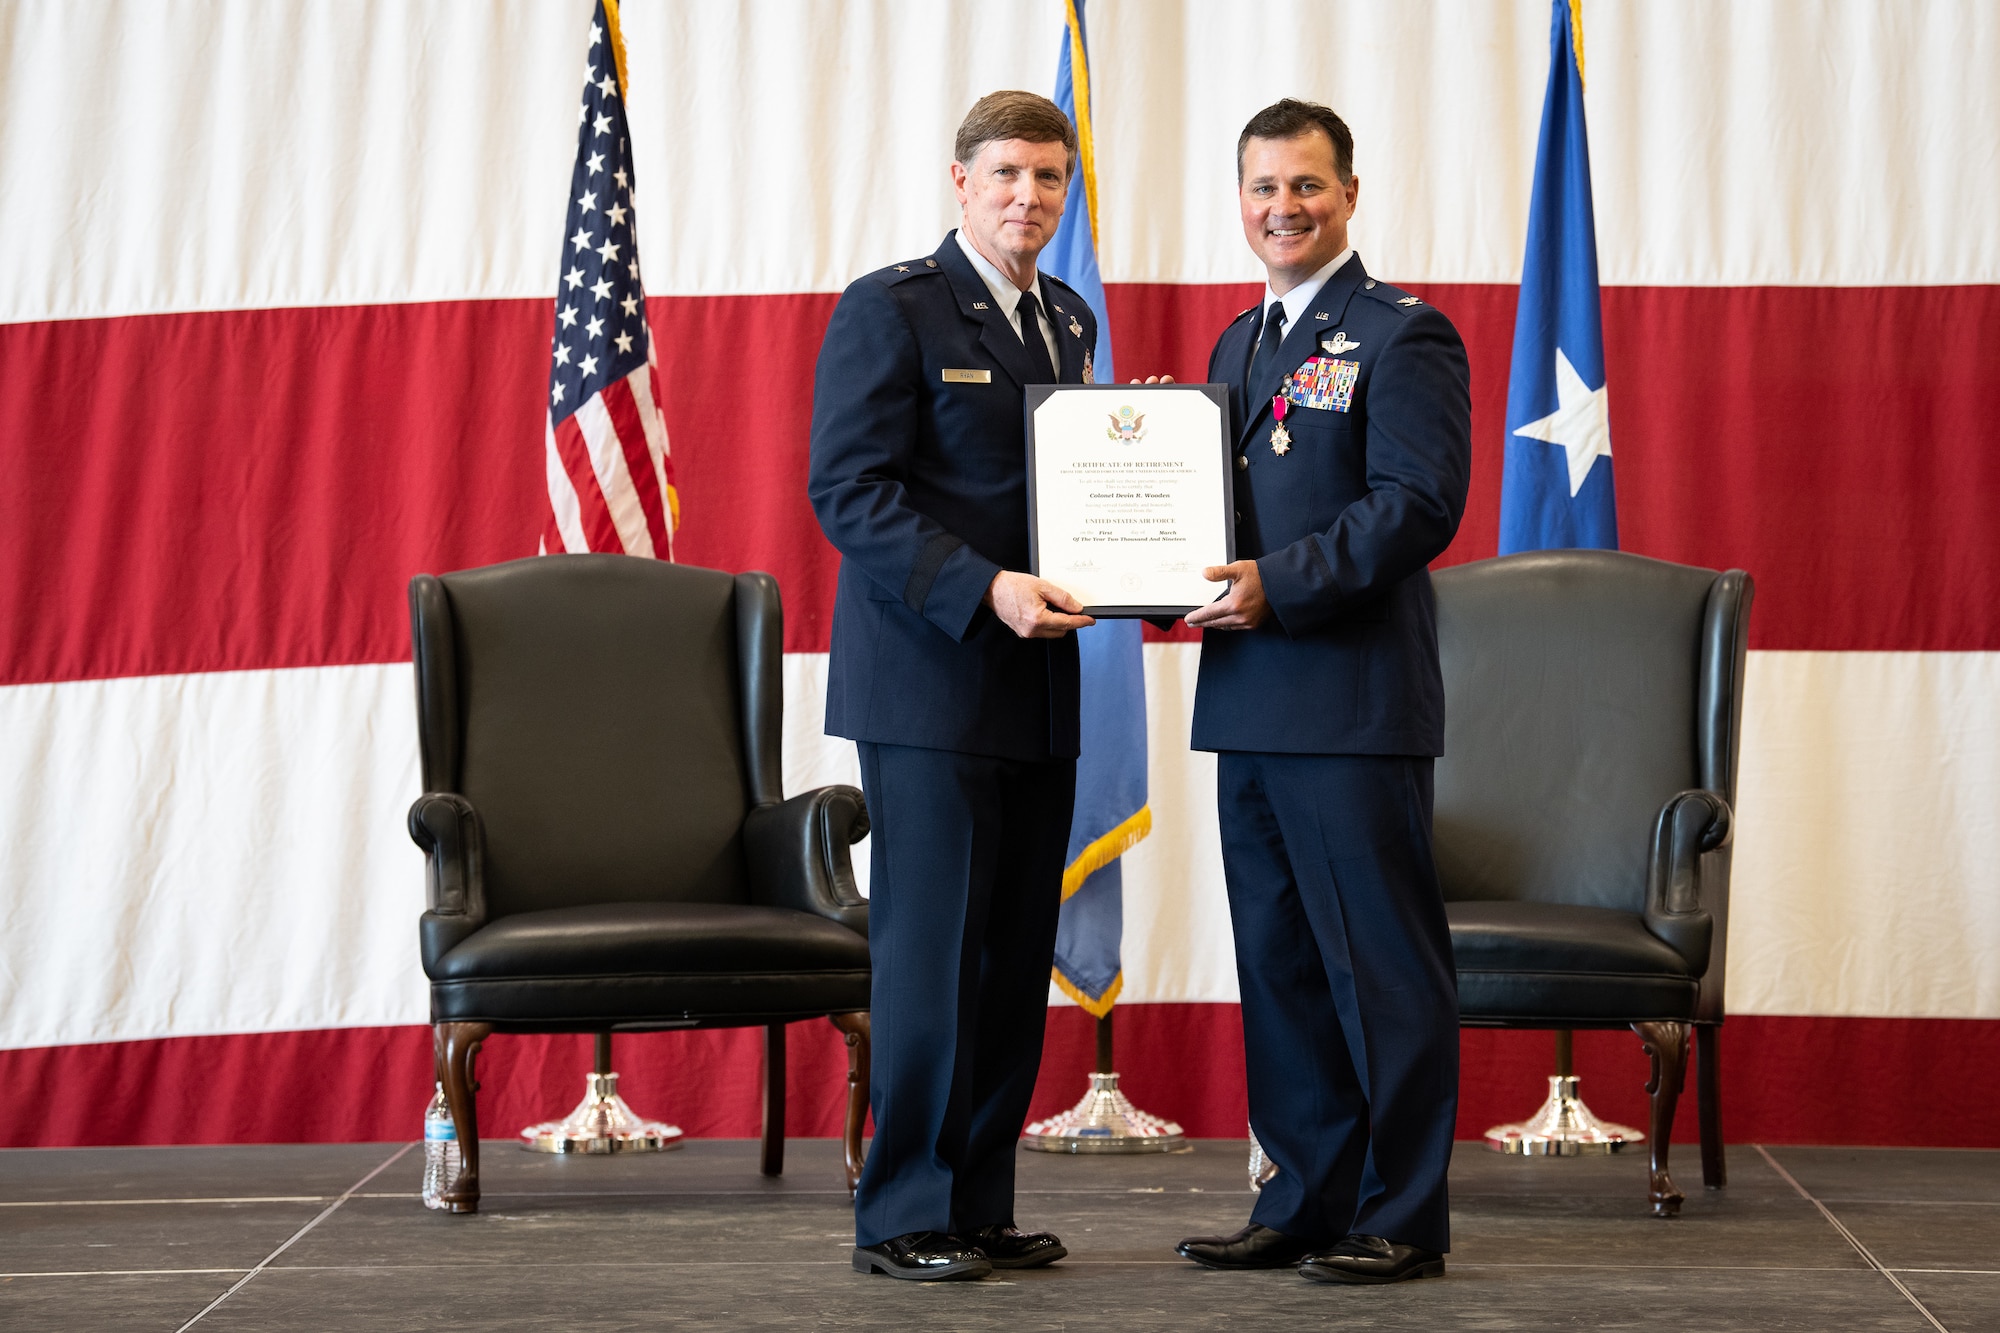 Col. Devin R. Wooden, former 137th Special Operations Wing commander, receives a certificate of retirement from the Oklahoma Assistant Adjutant General Brig. Gen. Thomas W. Ryan during his retirement ceremony at Will Rogers Air National Guard Base, May 5, 2019. Wooden spent his entire career, nearly 33 years, promoting from Airman 1st Class to Colonel in the Oklahoma Air National Guard. (U.S. Air National Guard photo by Senior Airman Jordan Martin)